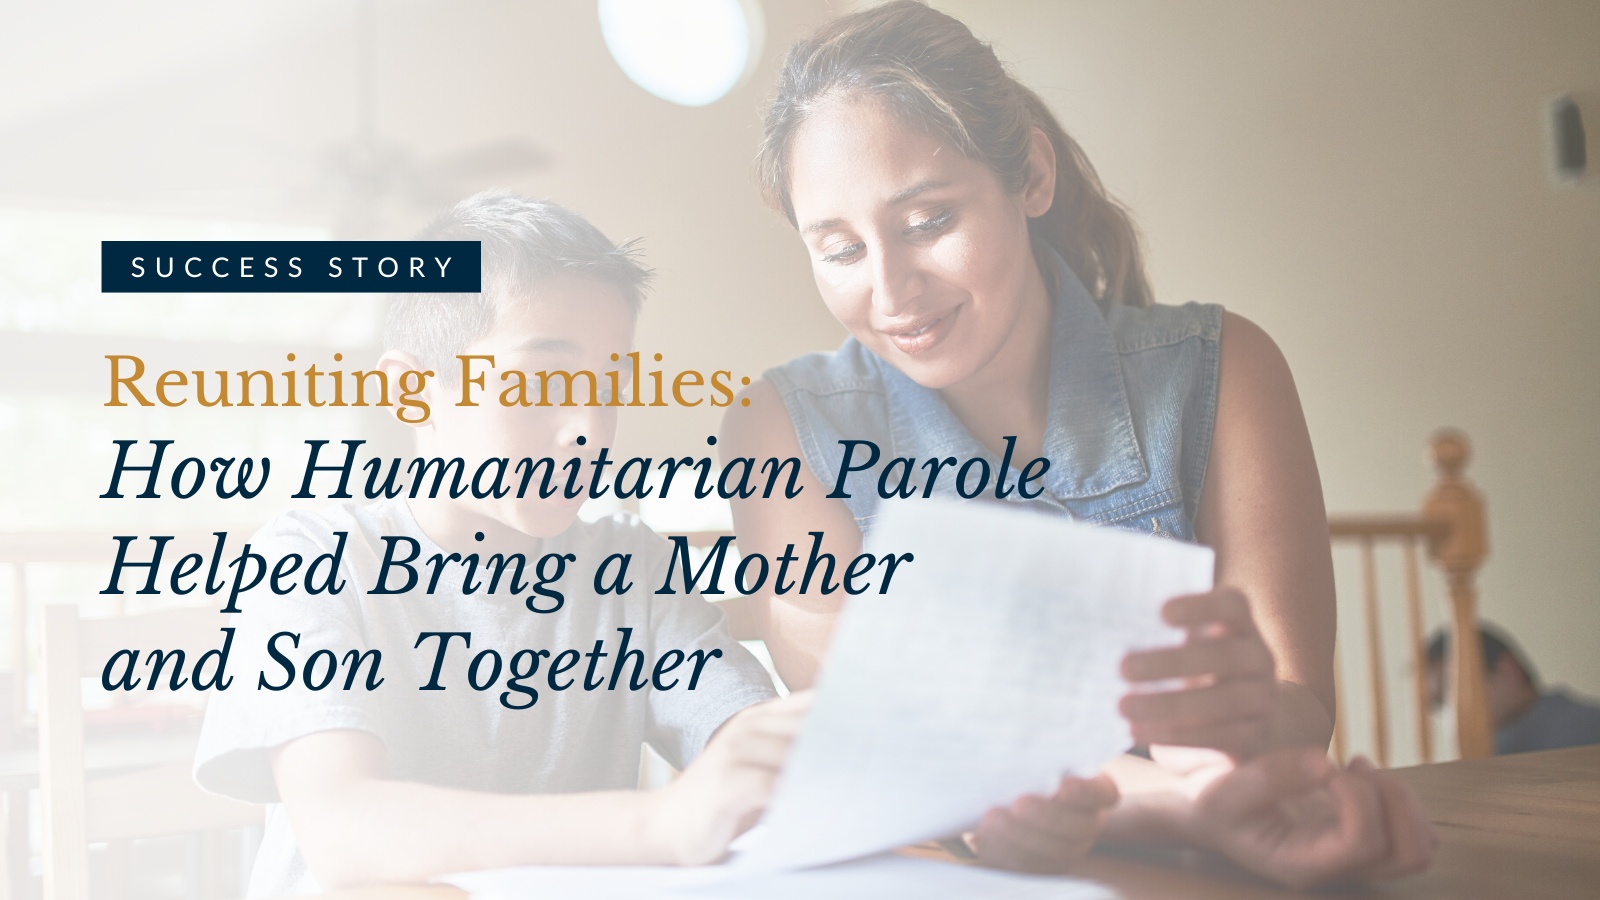  Reuniting Families: How Humanitarian Parole Helped Bring a Mother and Son Together